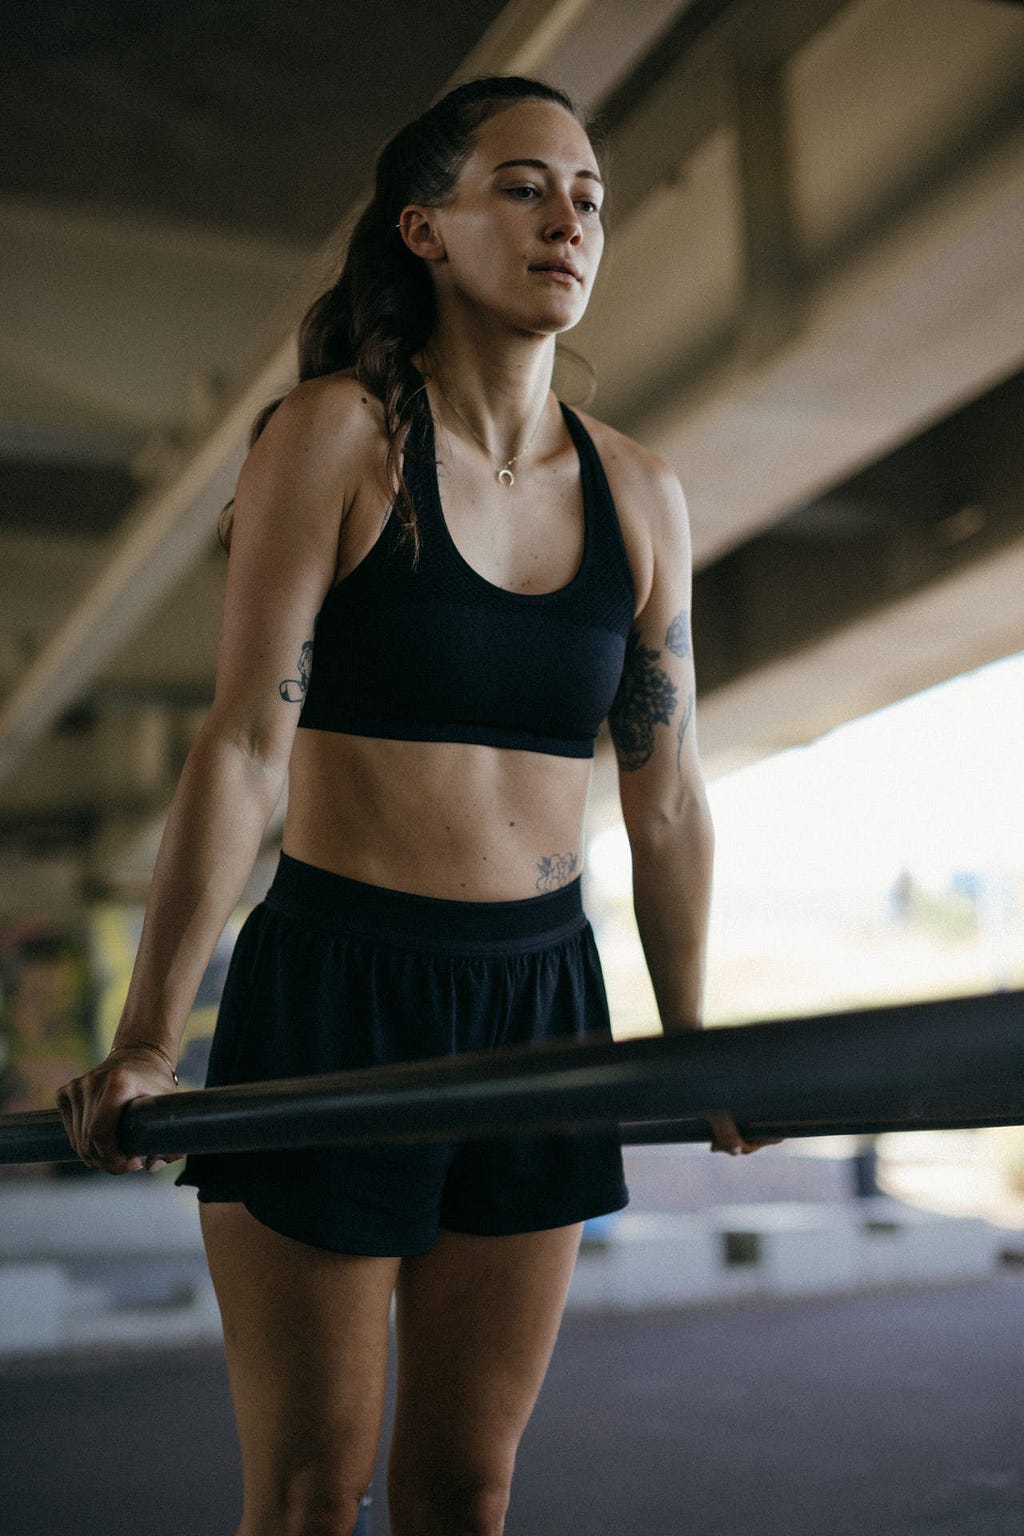 Woman with black sports bra and shorts exercising on a bar in the gym. Her face looks determined.